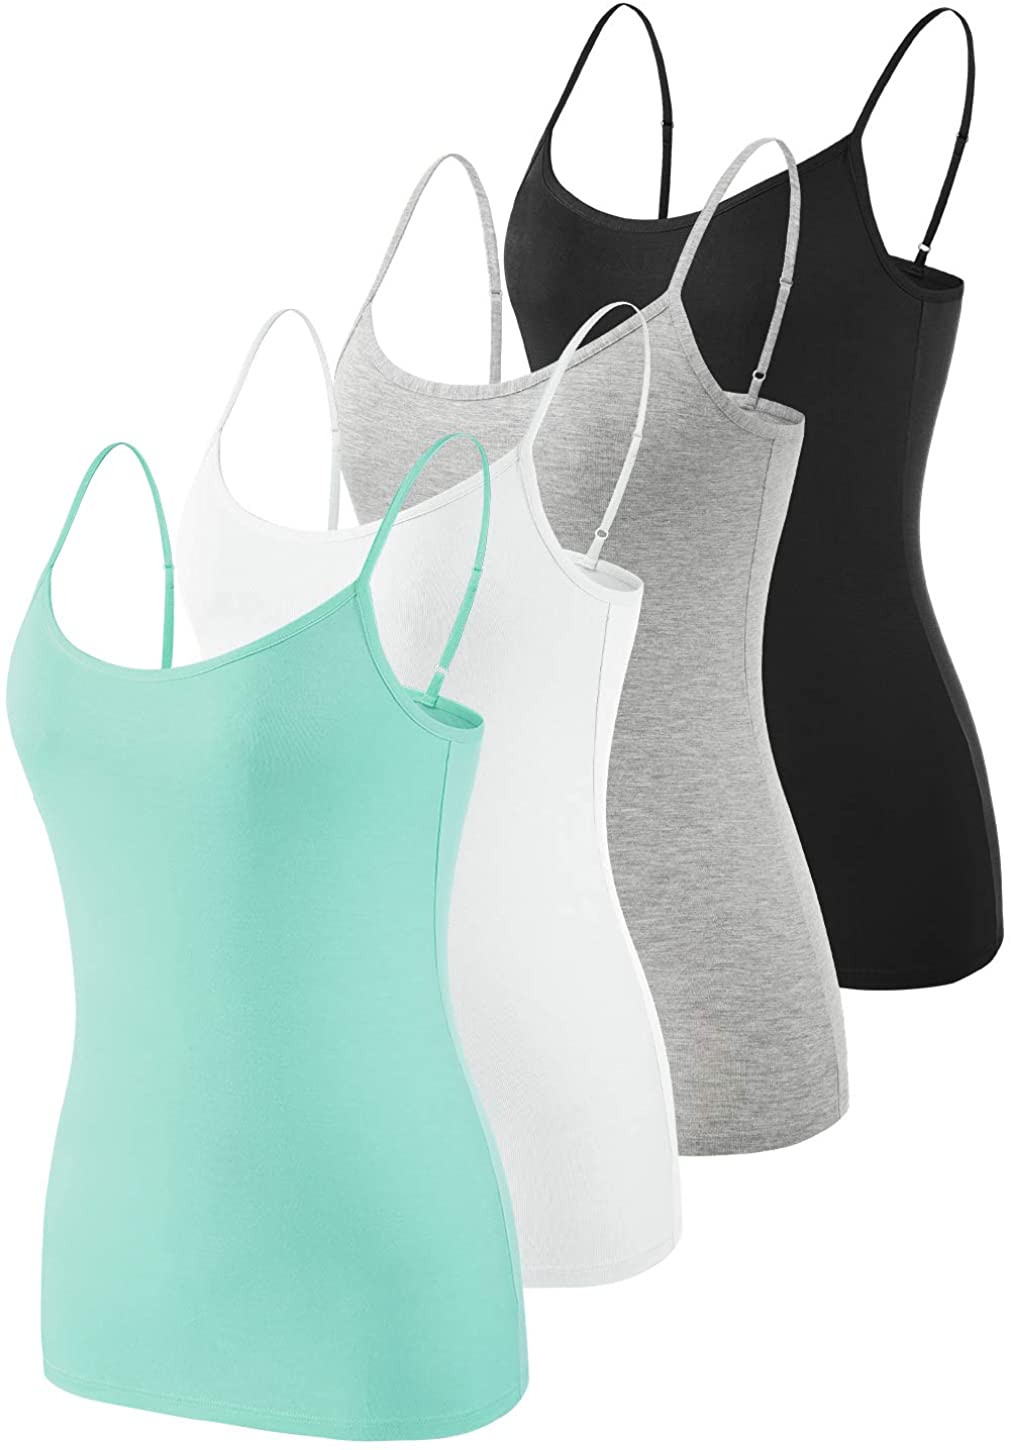 Women's Basic Solid Camisole Tank Tops with Adjustable Straps